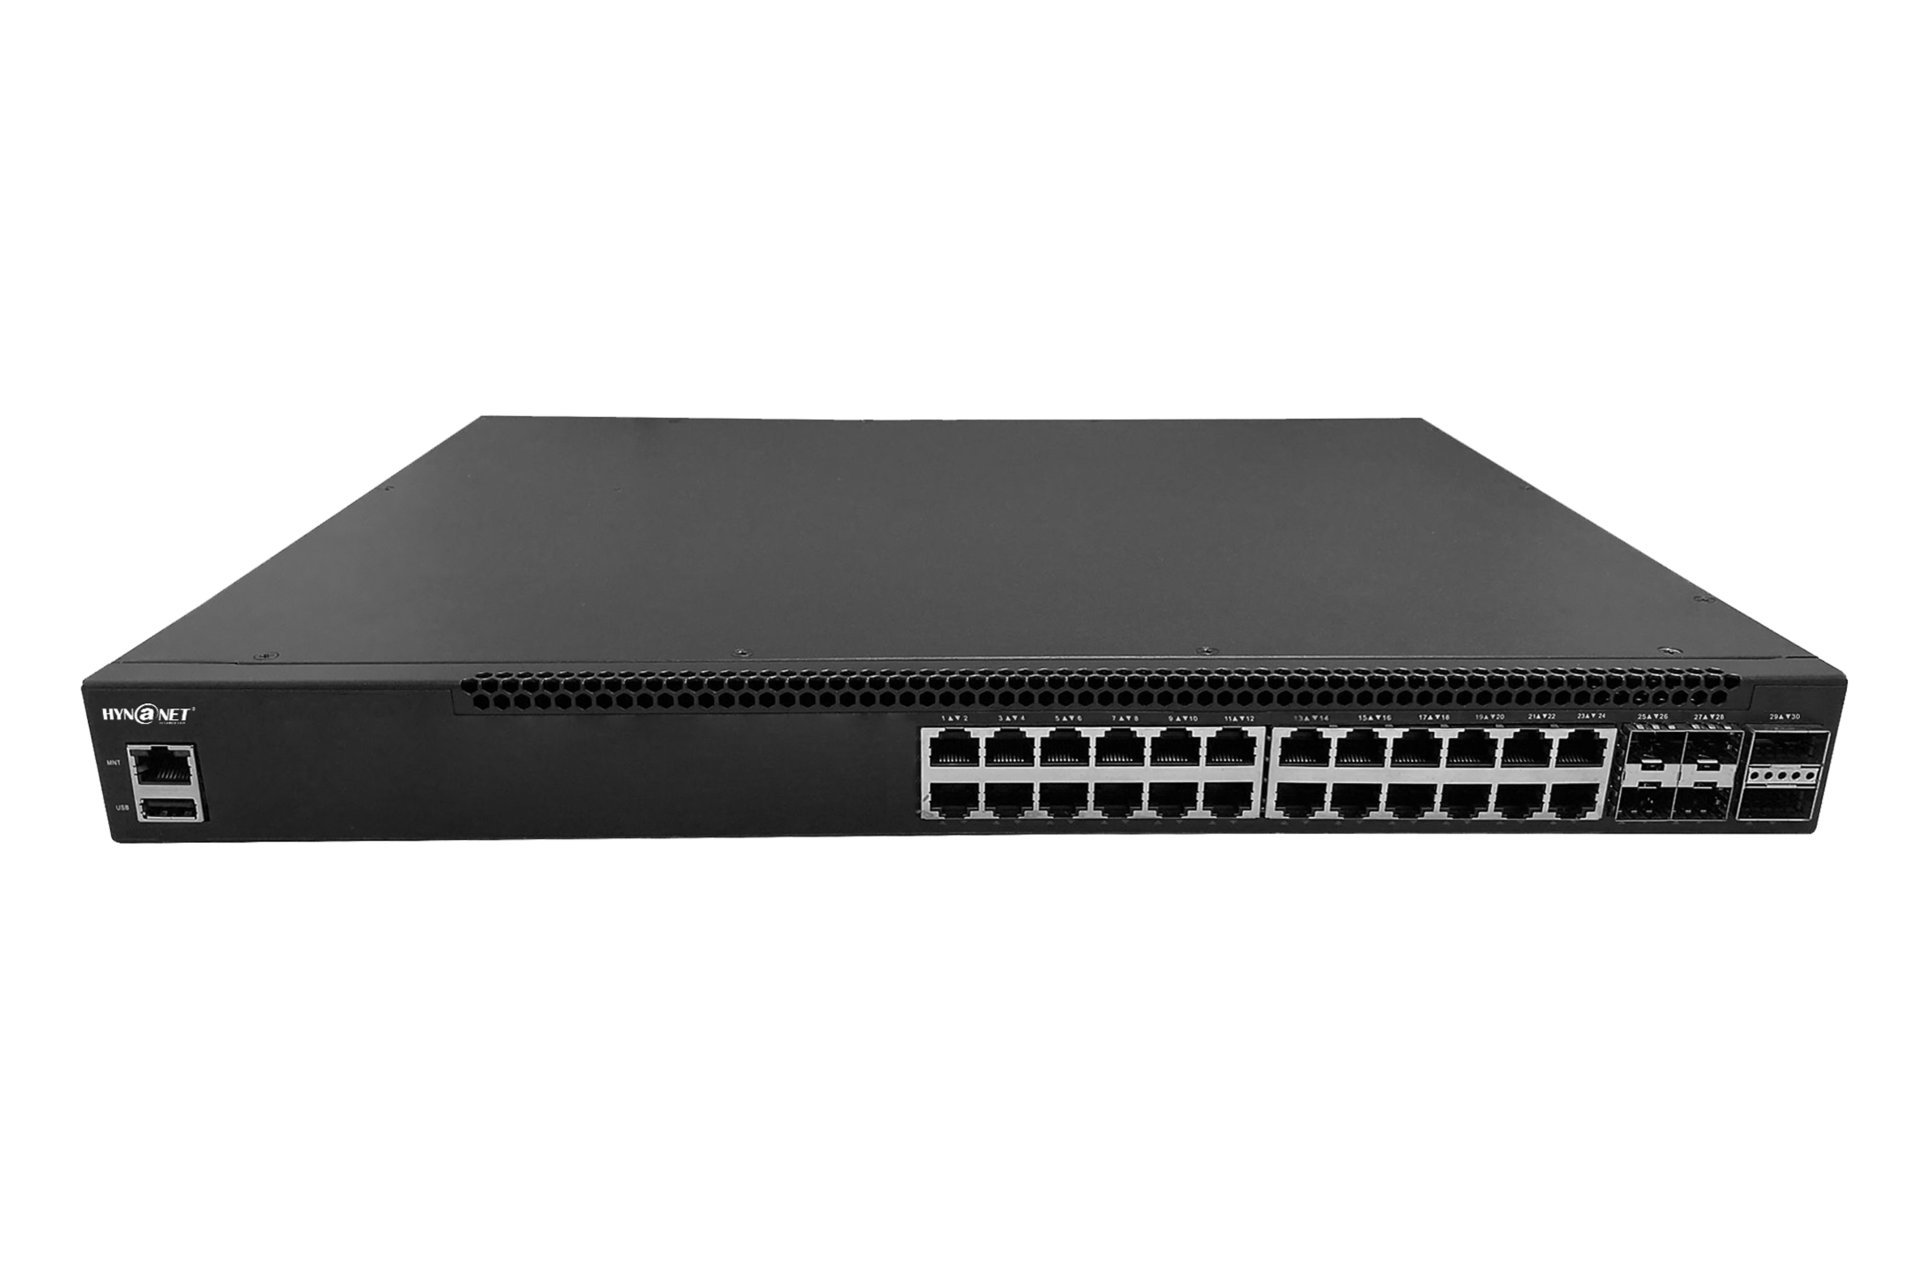 WS1000B-30T 24 Ports 1GbE Data Center and Enterprise Switch Bare-Metal Hardware